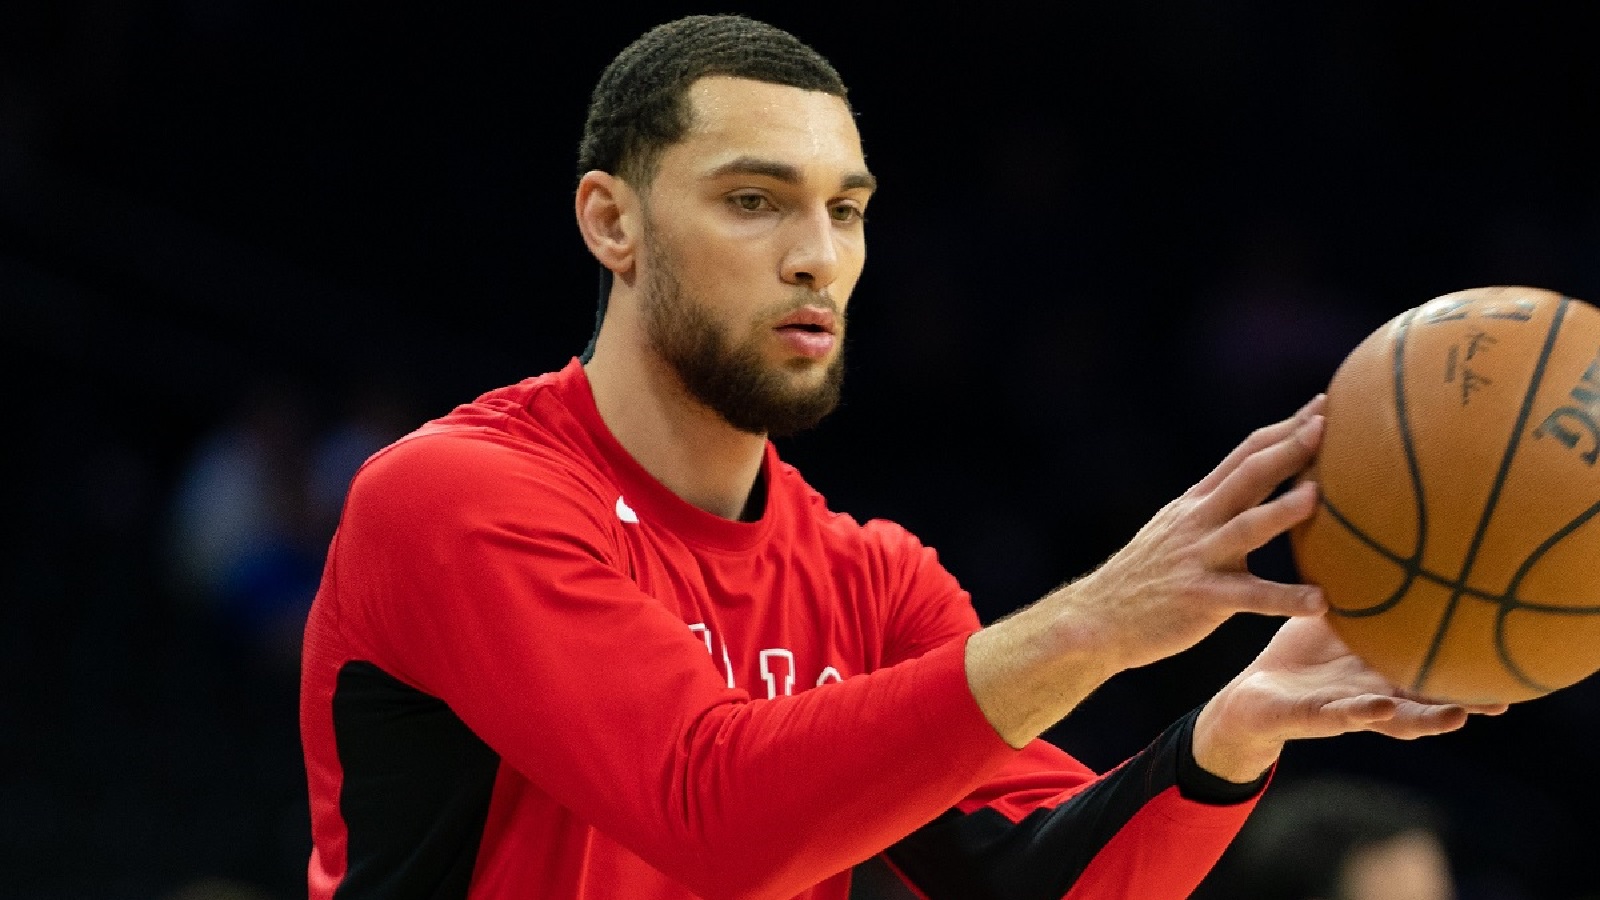 Zach LaVine camp would be against a Knicks trade: source